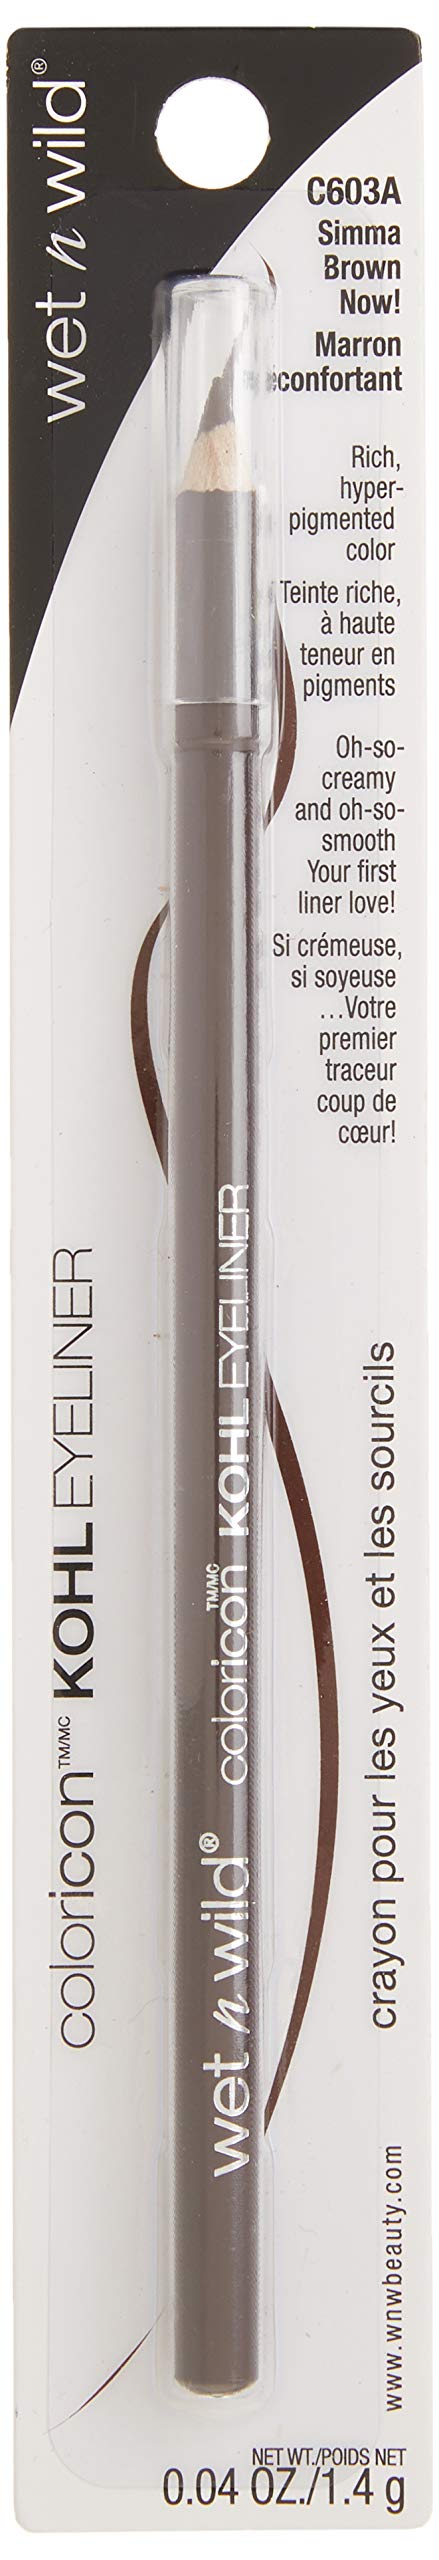 wet n wild Color Icon Kohl Liner Pencil, Simma Brown Now!, 0.04 Ounce